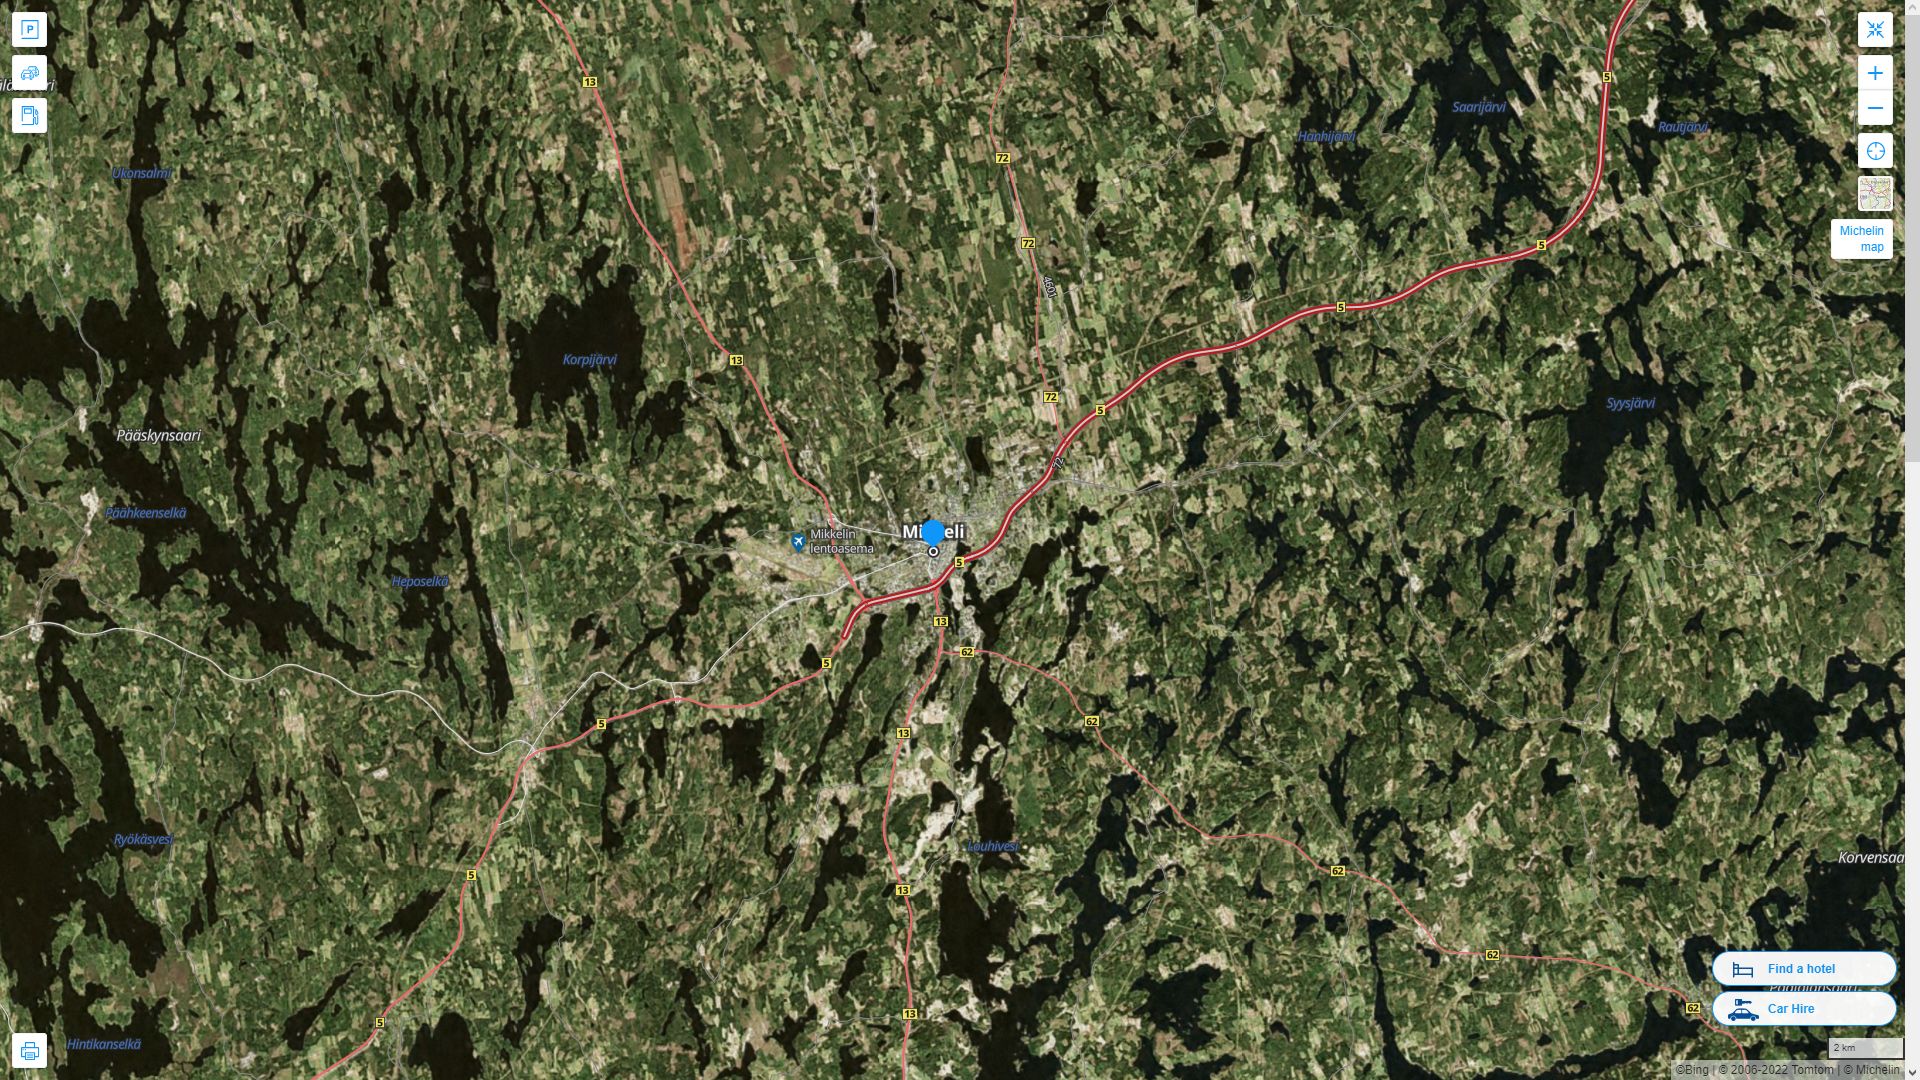 Mikkeli Highway and Road Map with Satellite View